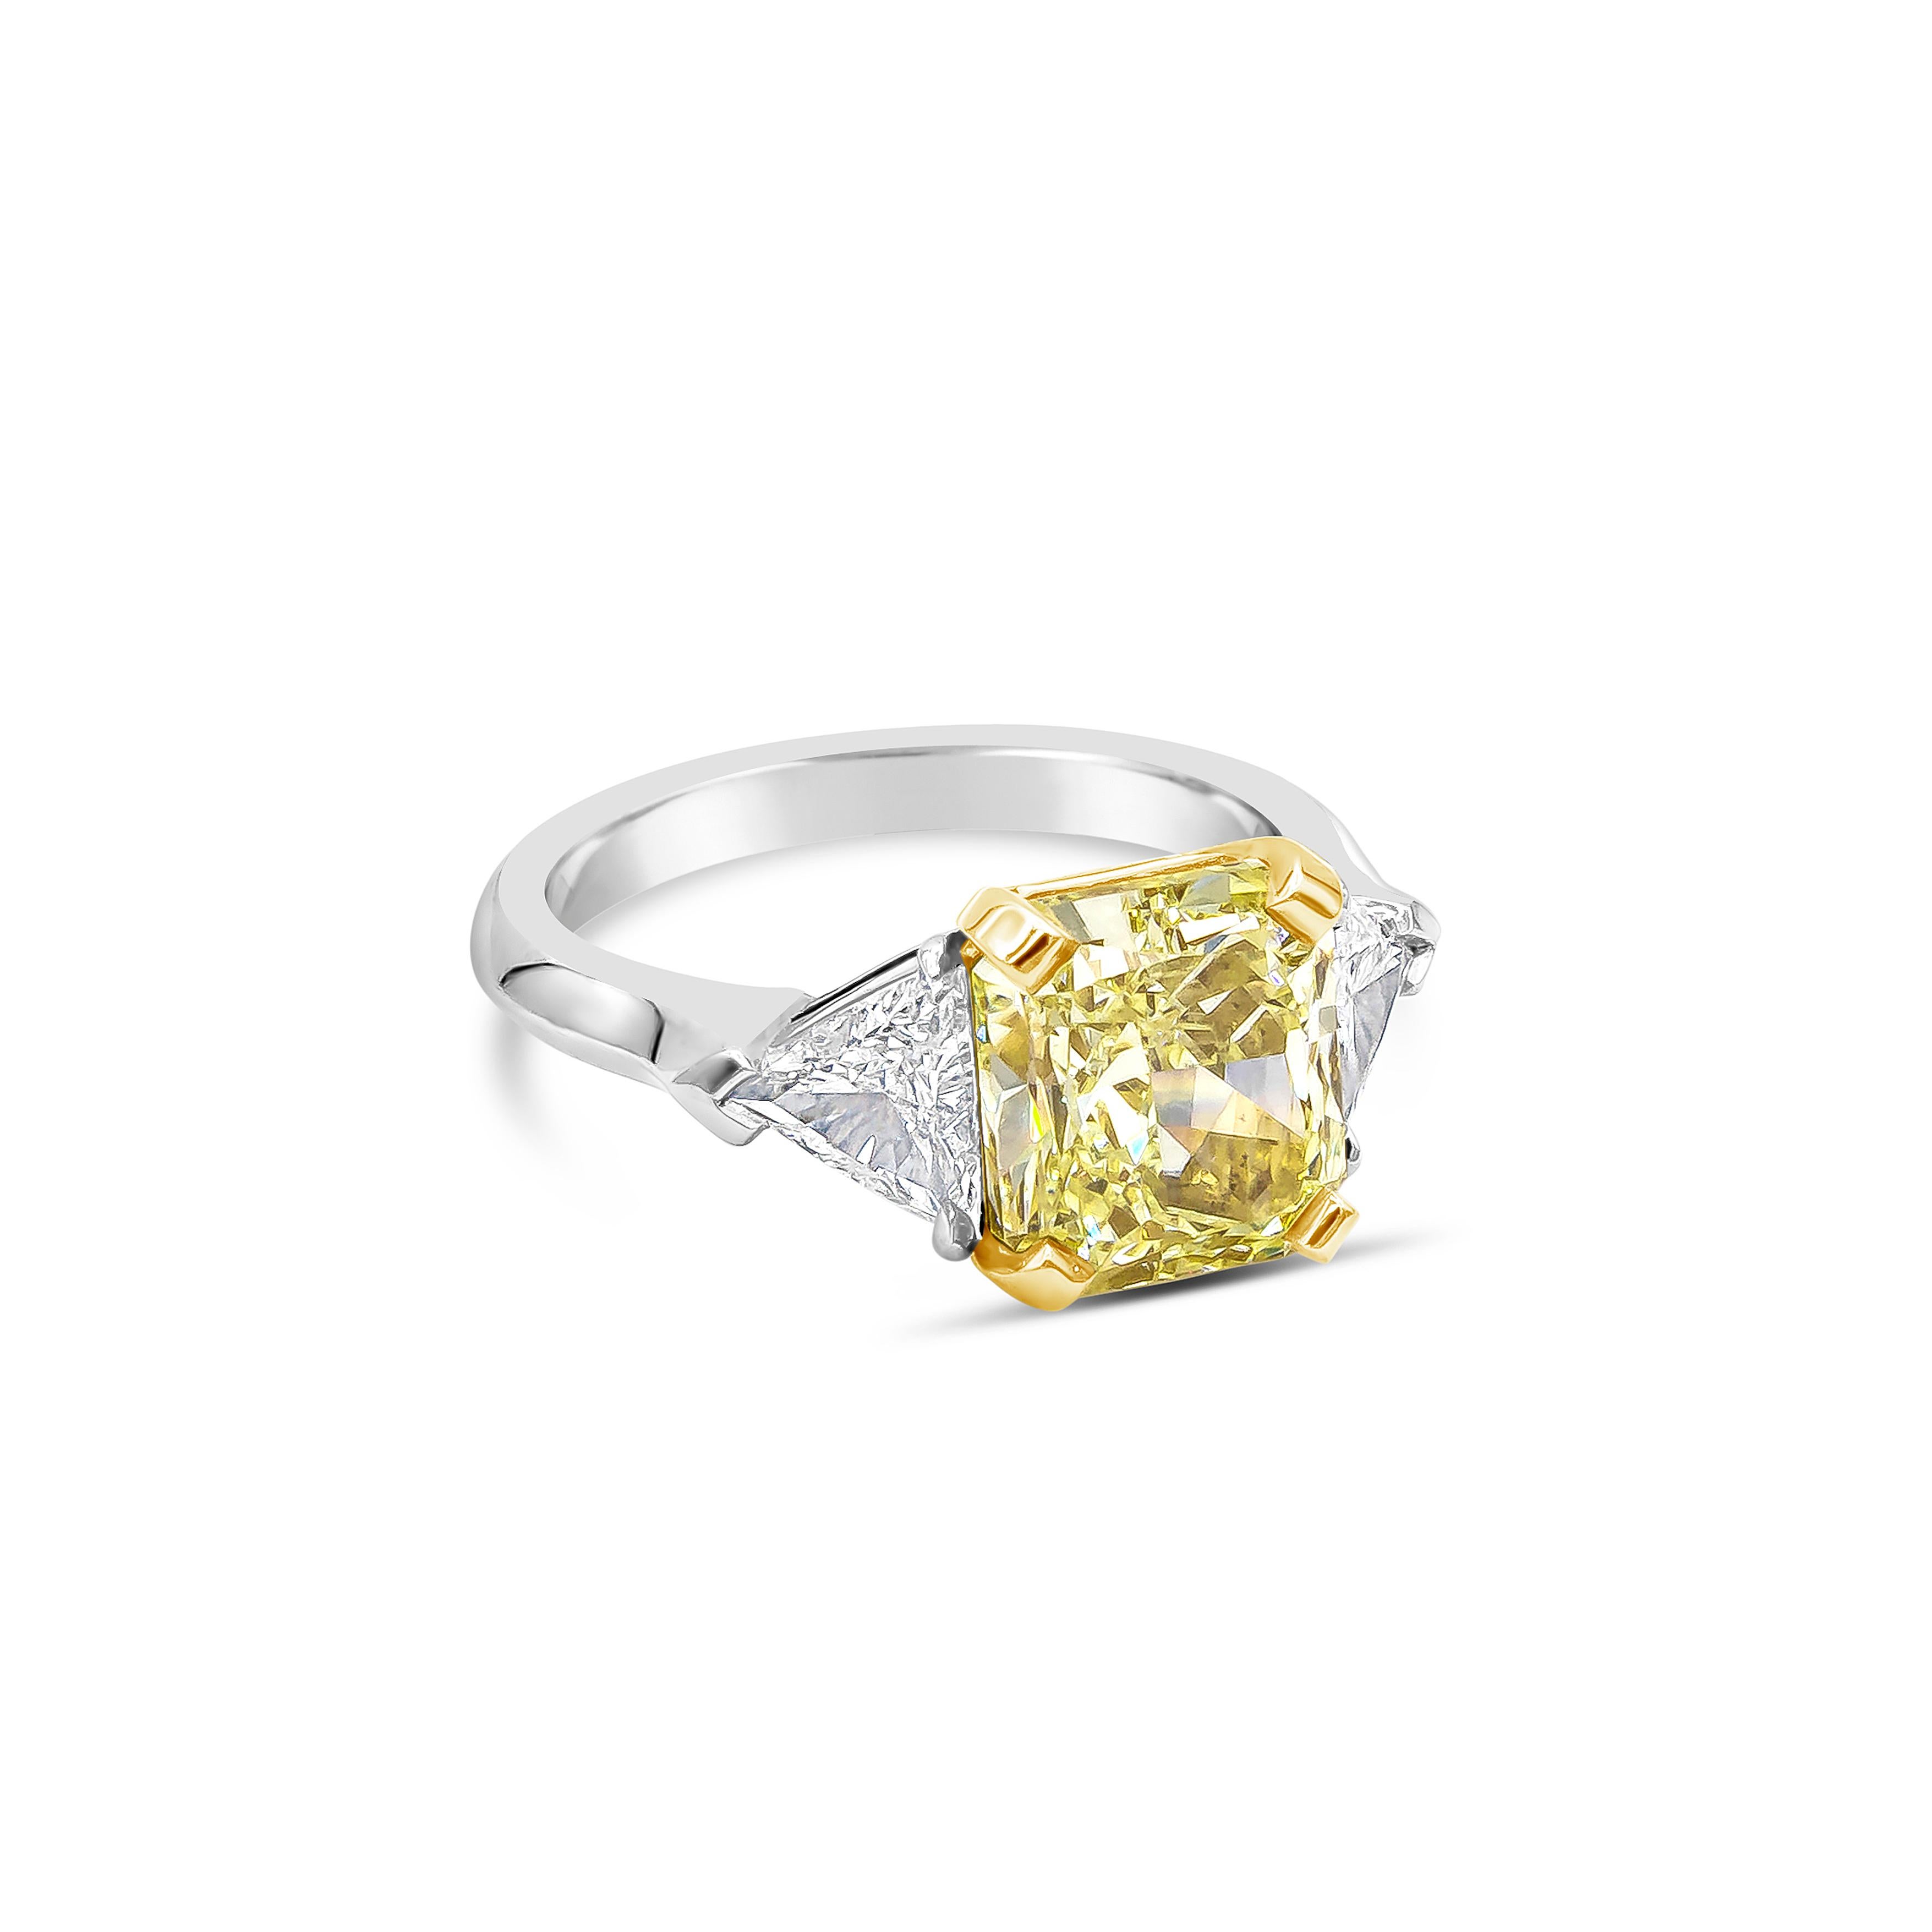 Showcases a 4.06 carats radiant cut fancy yellow diamond that GIA certified as Fancy Yellow color, SI1 in clarity, accented by brilliant trillion cut diamonds on each side weighing 0.81 carats total. Set in an 18k yellow gold and platinum mounting.